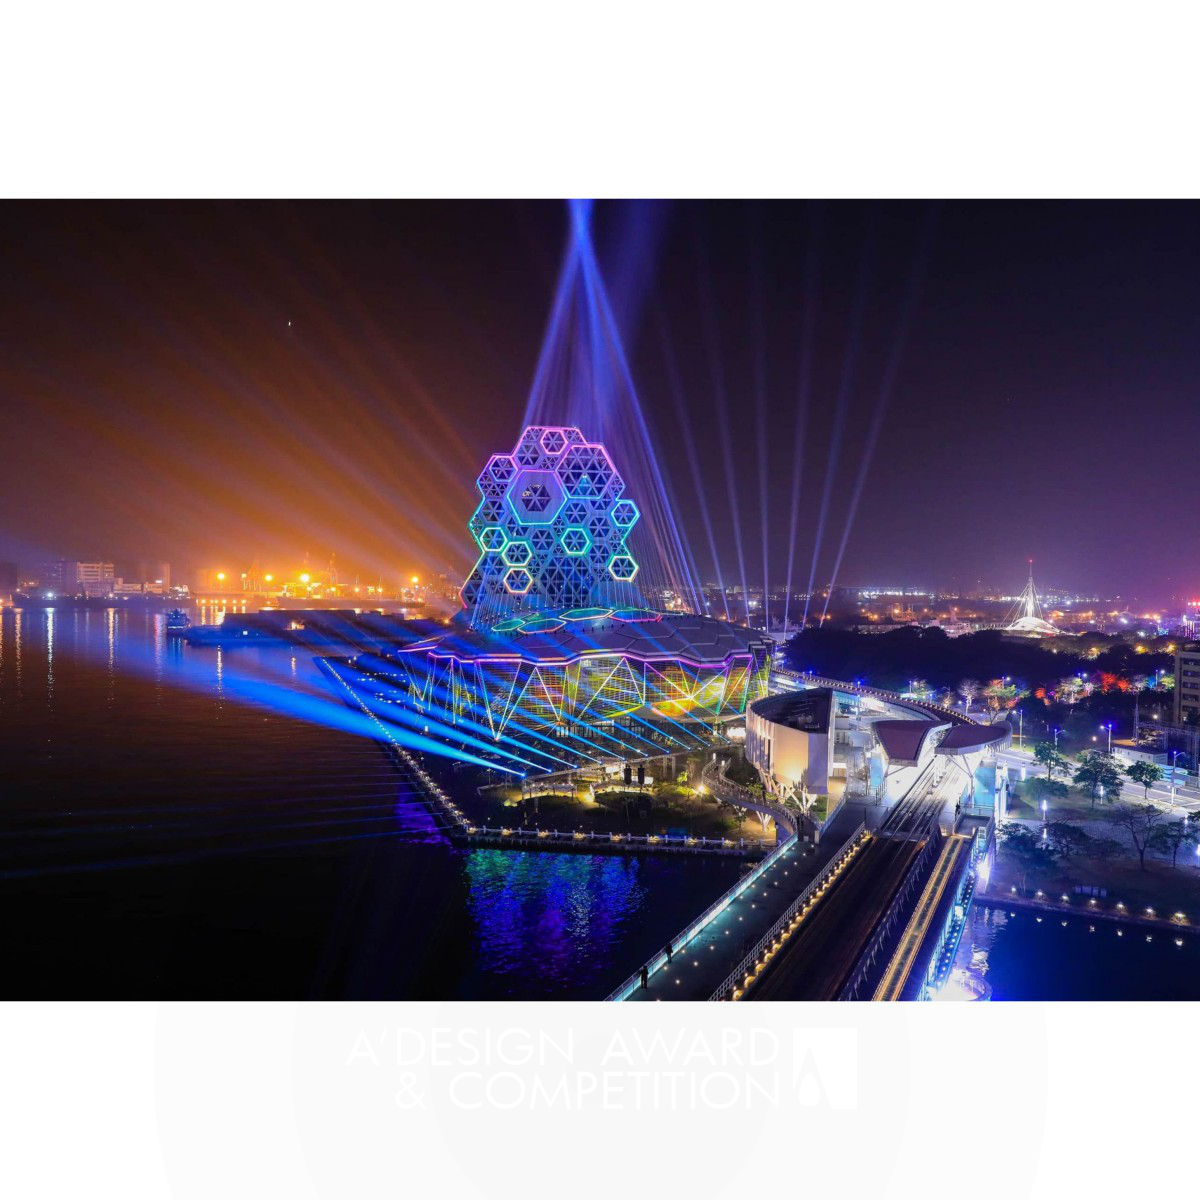 Lantern Festival Events by Kaohsiung City Government